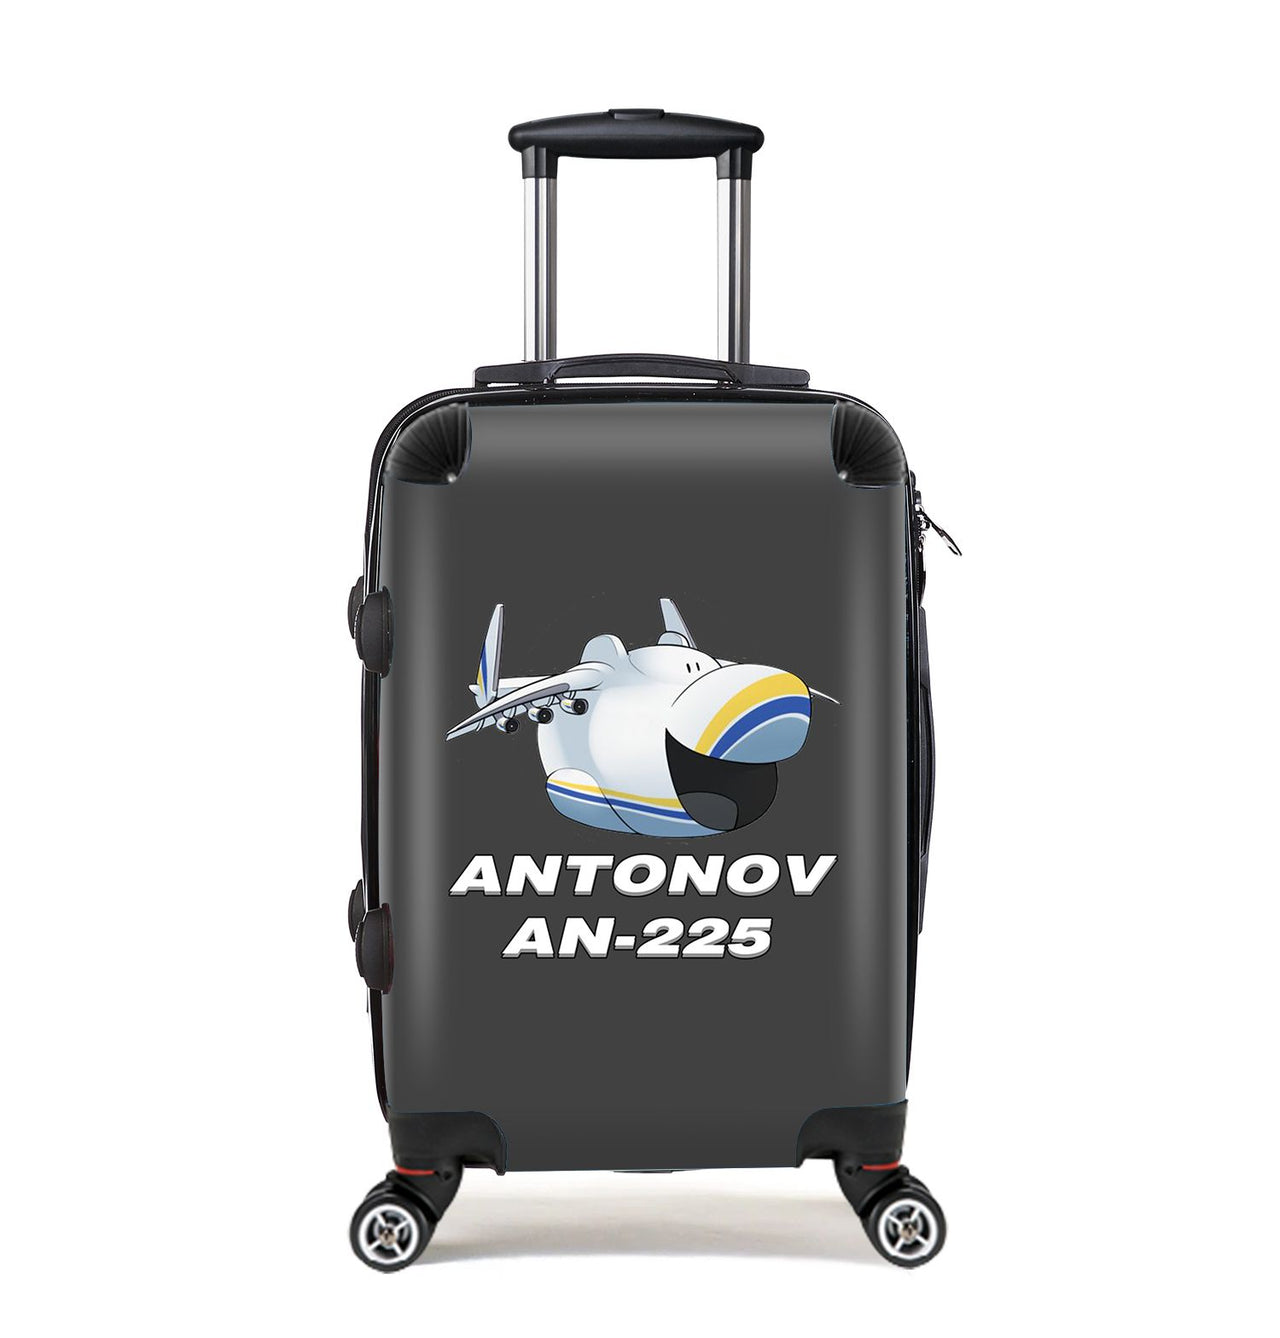 Antonov AN-225 (23) Designed Cabin Size Luggages